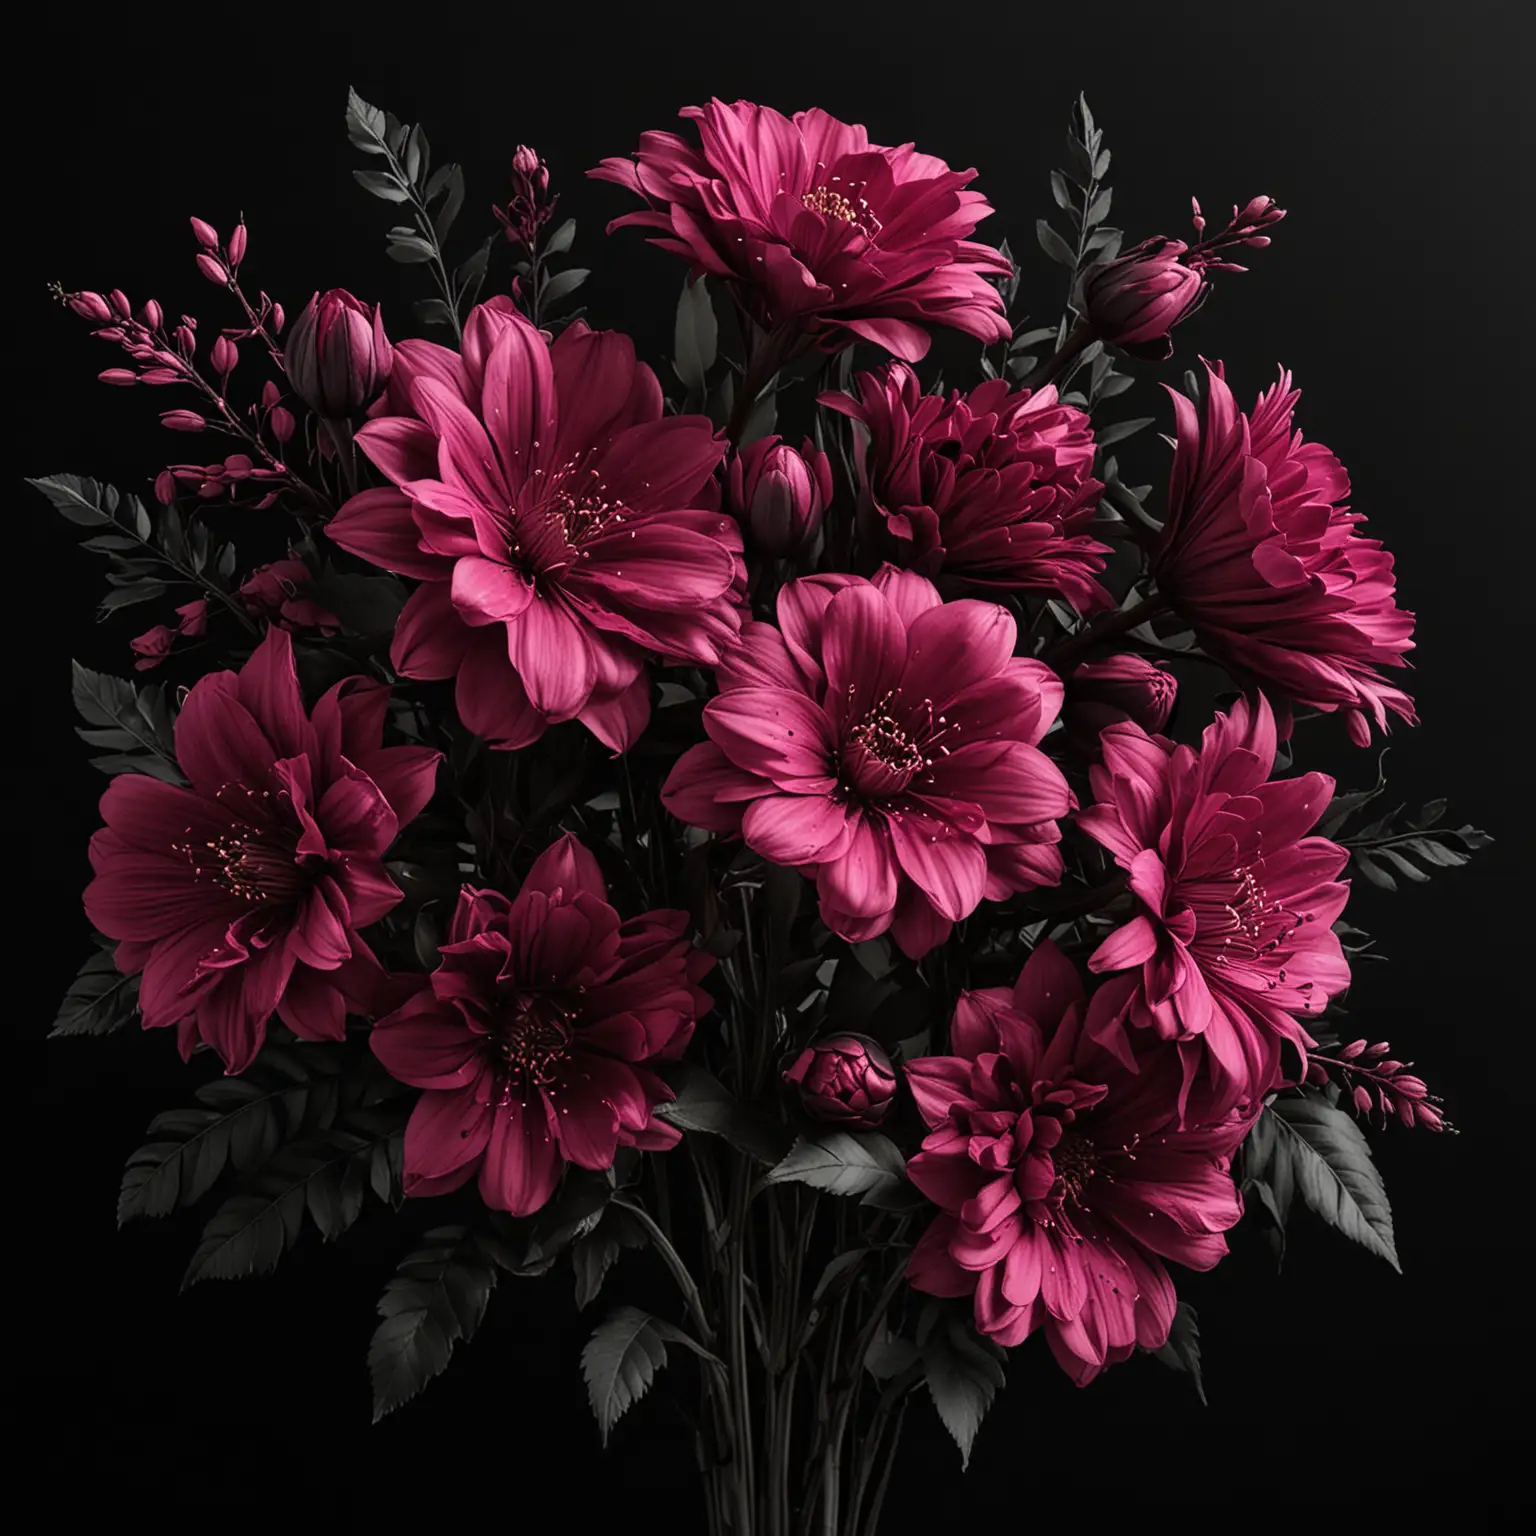 magenta flower bouquet outlines on black background, emerging from the bottom right corner